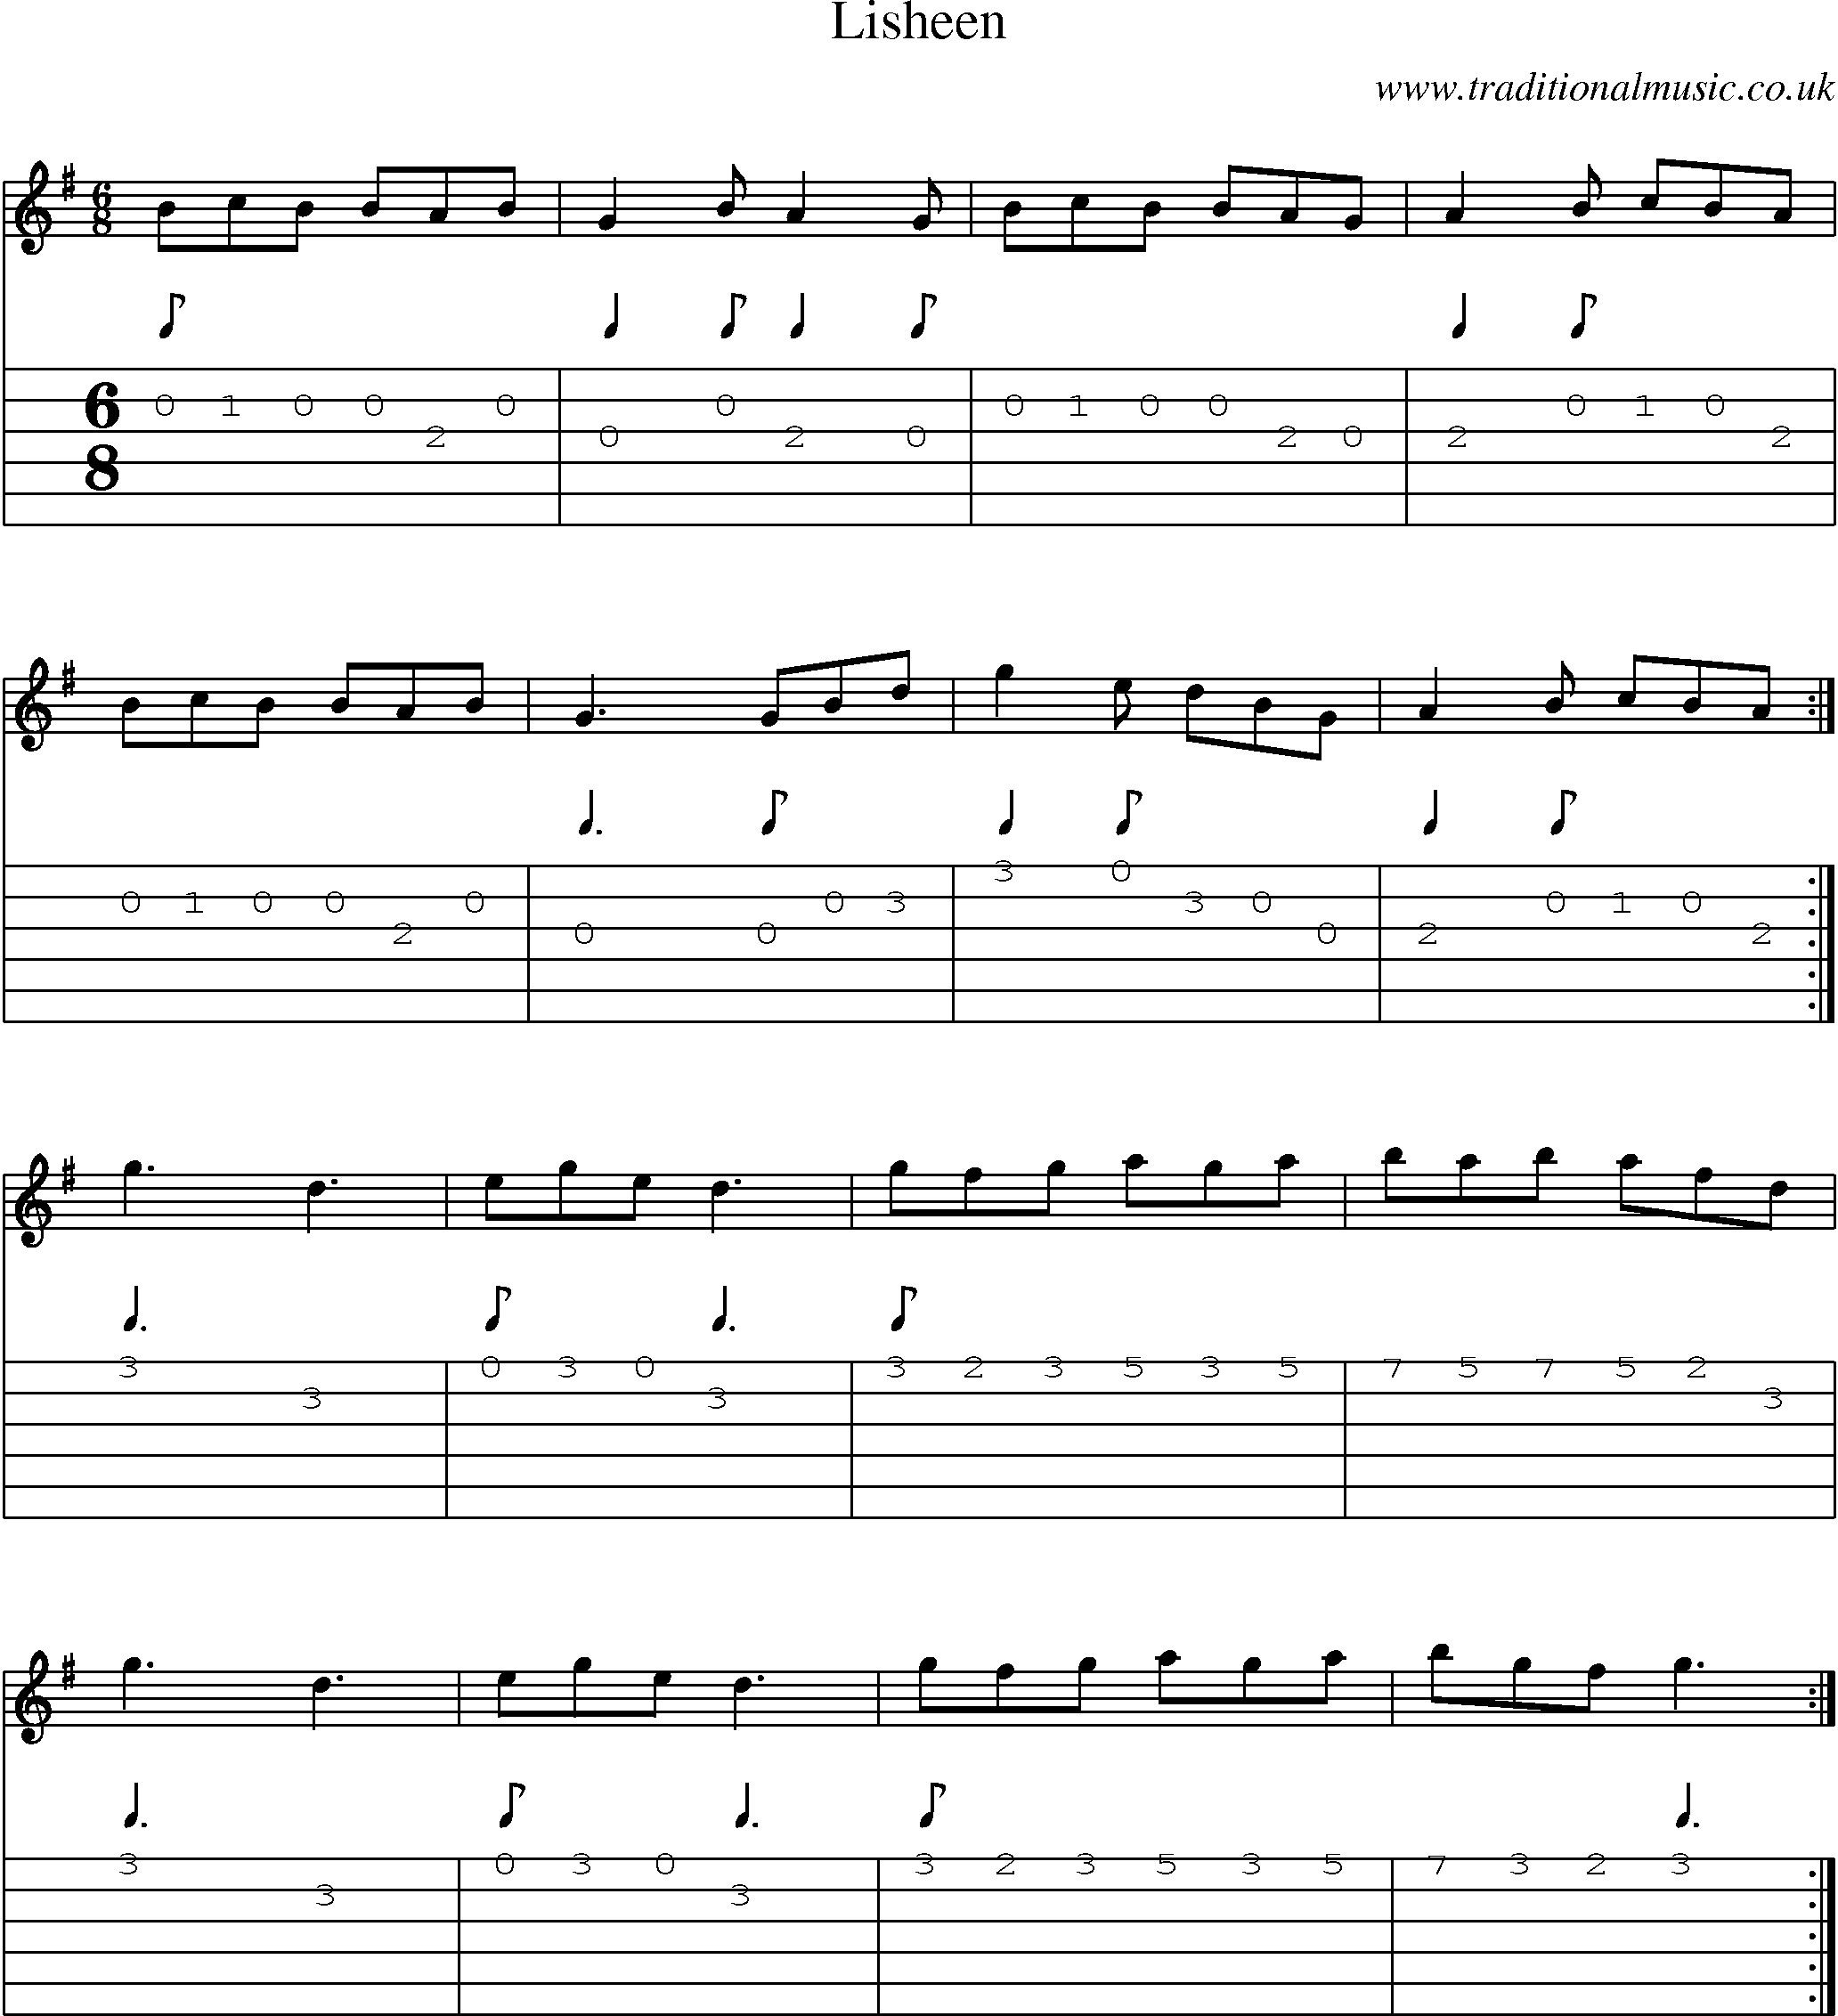 Music Score and Guitar Tabs for Lisheen